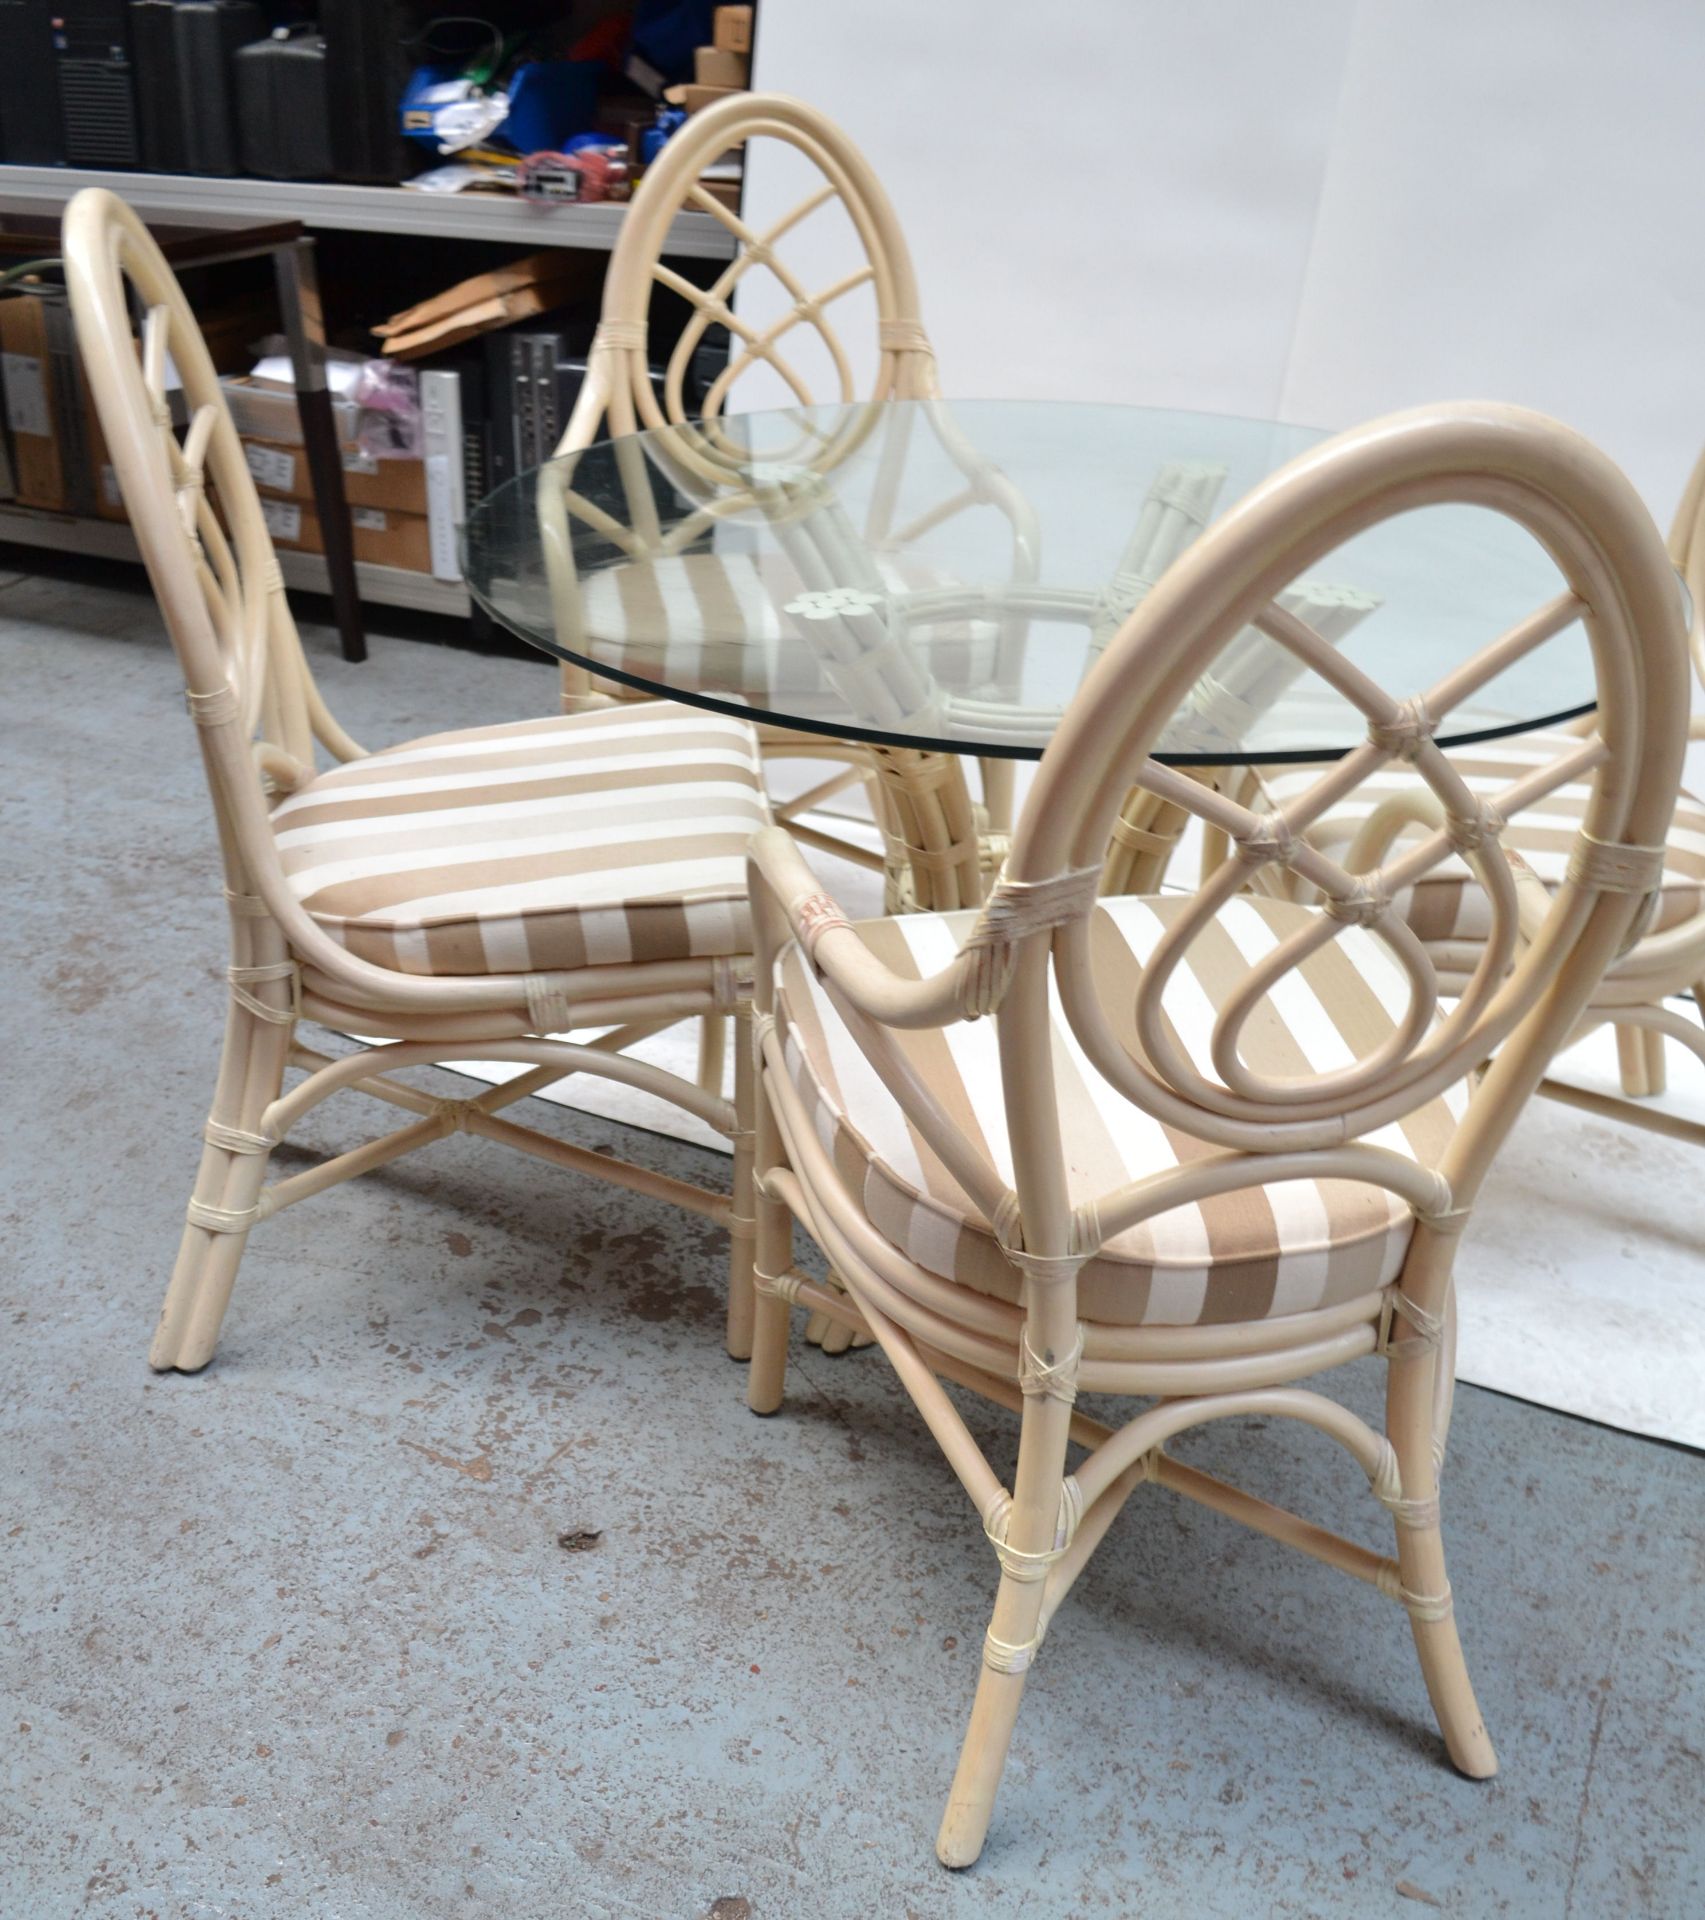 Glass Topped Cane Table with 4 Chairs - AE010 - CL007 - Location: Altrincham WA14 Dimensions: - Image 4 of 14